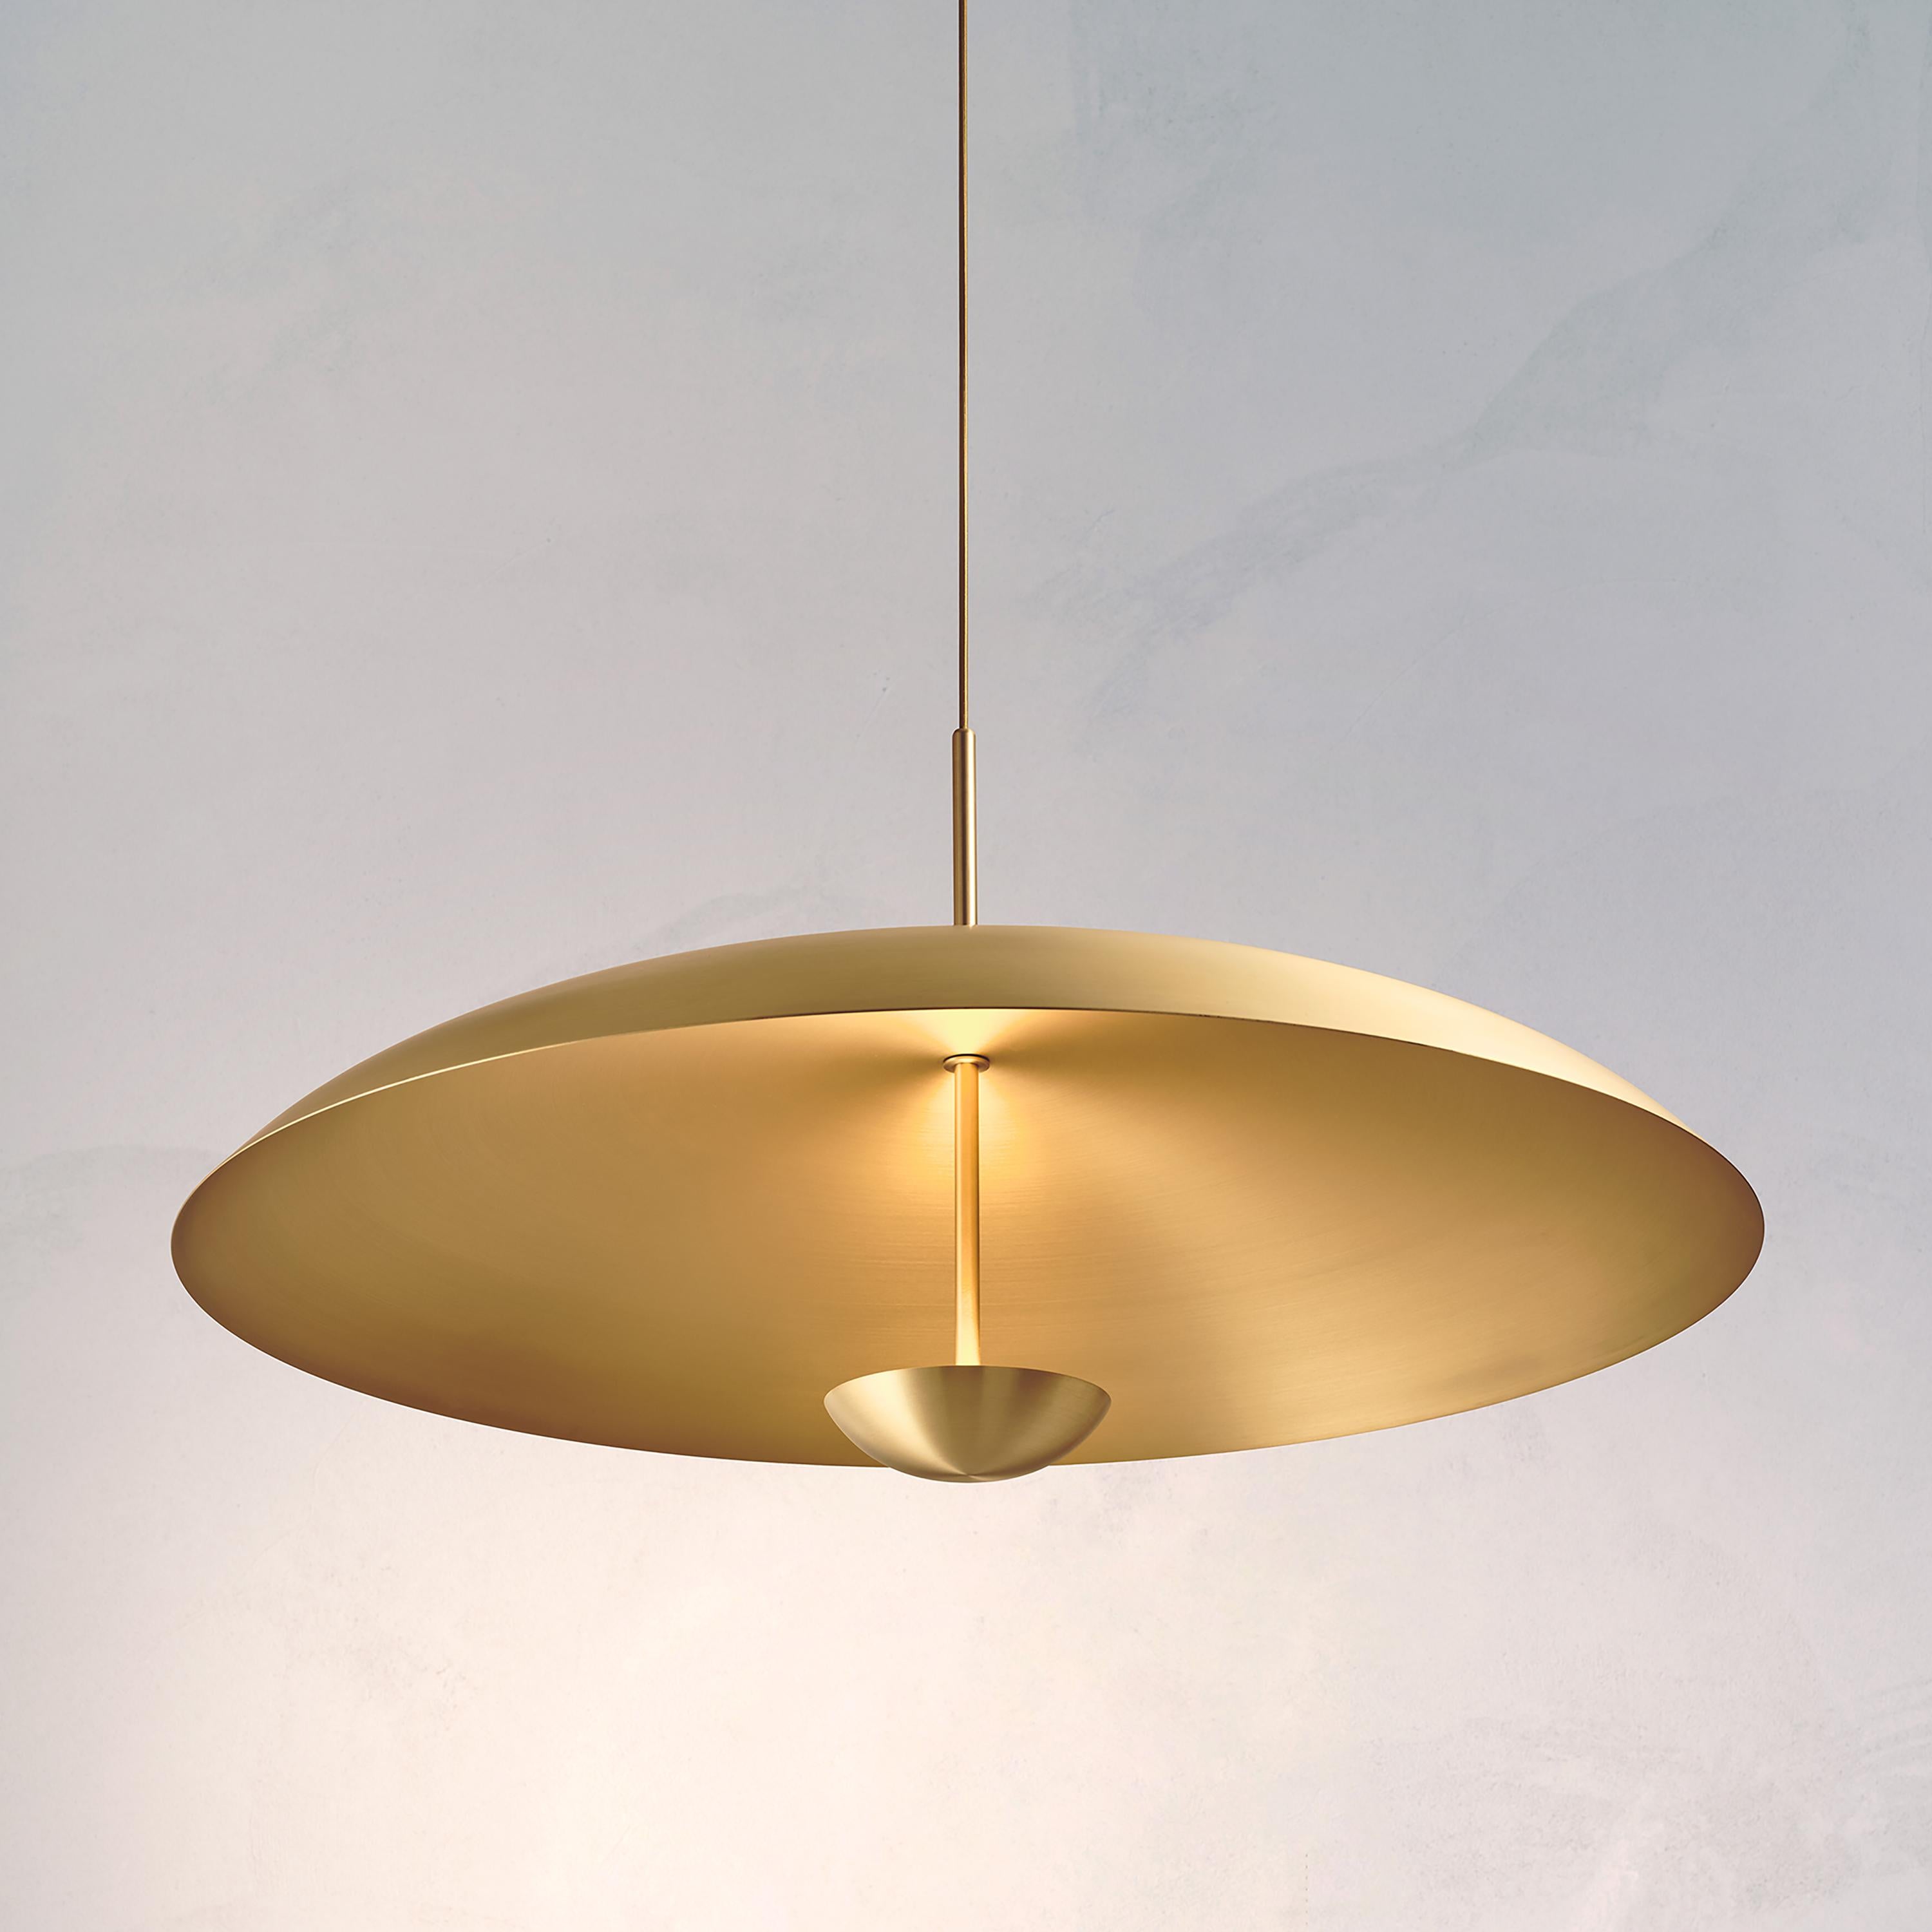 Composed by two carefully hand-spun brass plates, the Sol Pendant preserves the beautiful texture and quality of fine brass. Light is projected into the shade before reflecting out, illuminating without creating a glare. 

This light fixture is